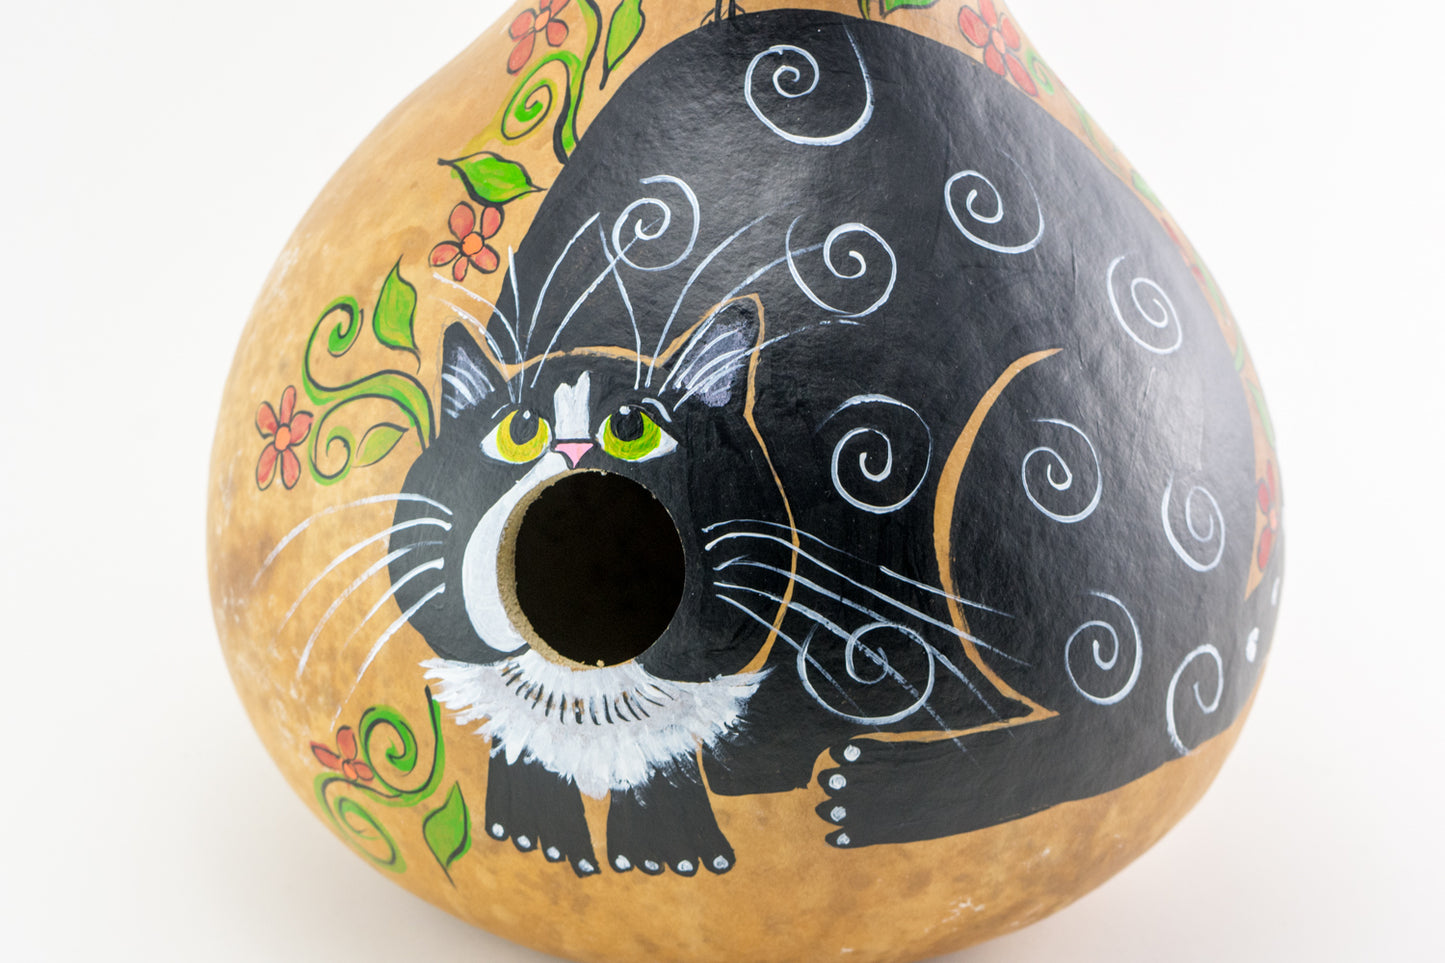 Birdhouse with Silly Cat Mouth Open Gourd Art for Garden - Gourdaments